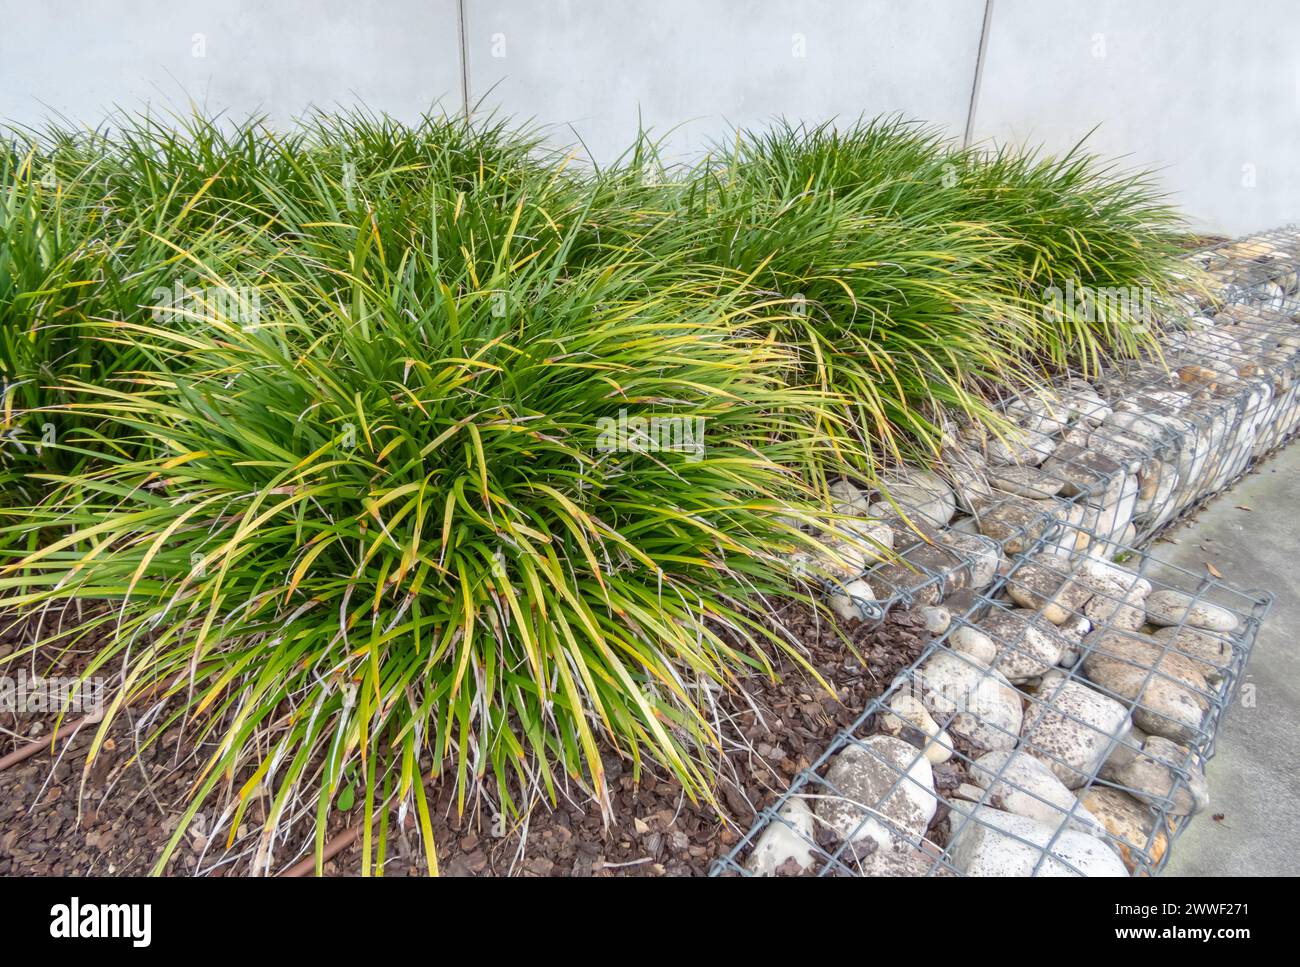 Japanese sedge or Carex morrowii or kan suge or Morrow's sedge or Japanese grass sedge plants. Ornamental grass and gabion in the urban design. Stones Stock Photo